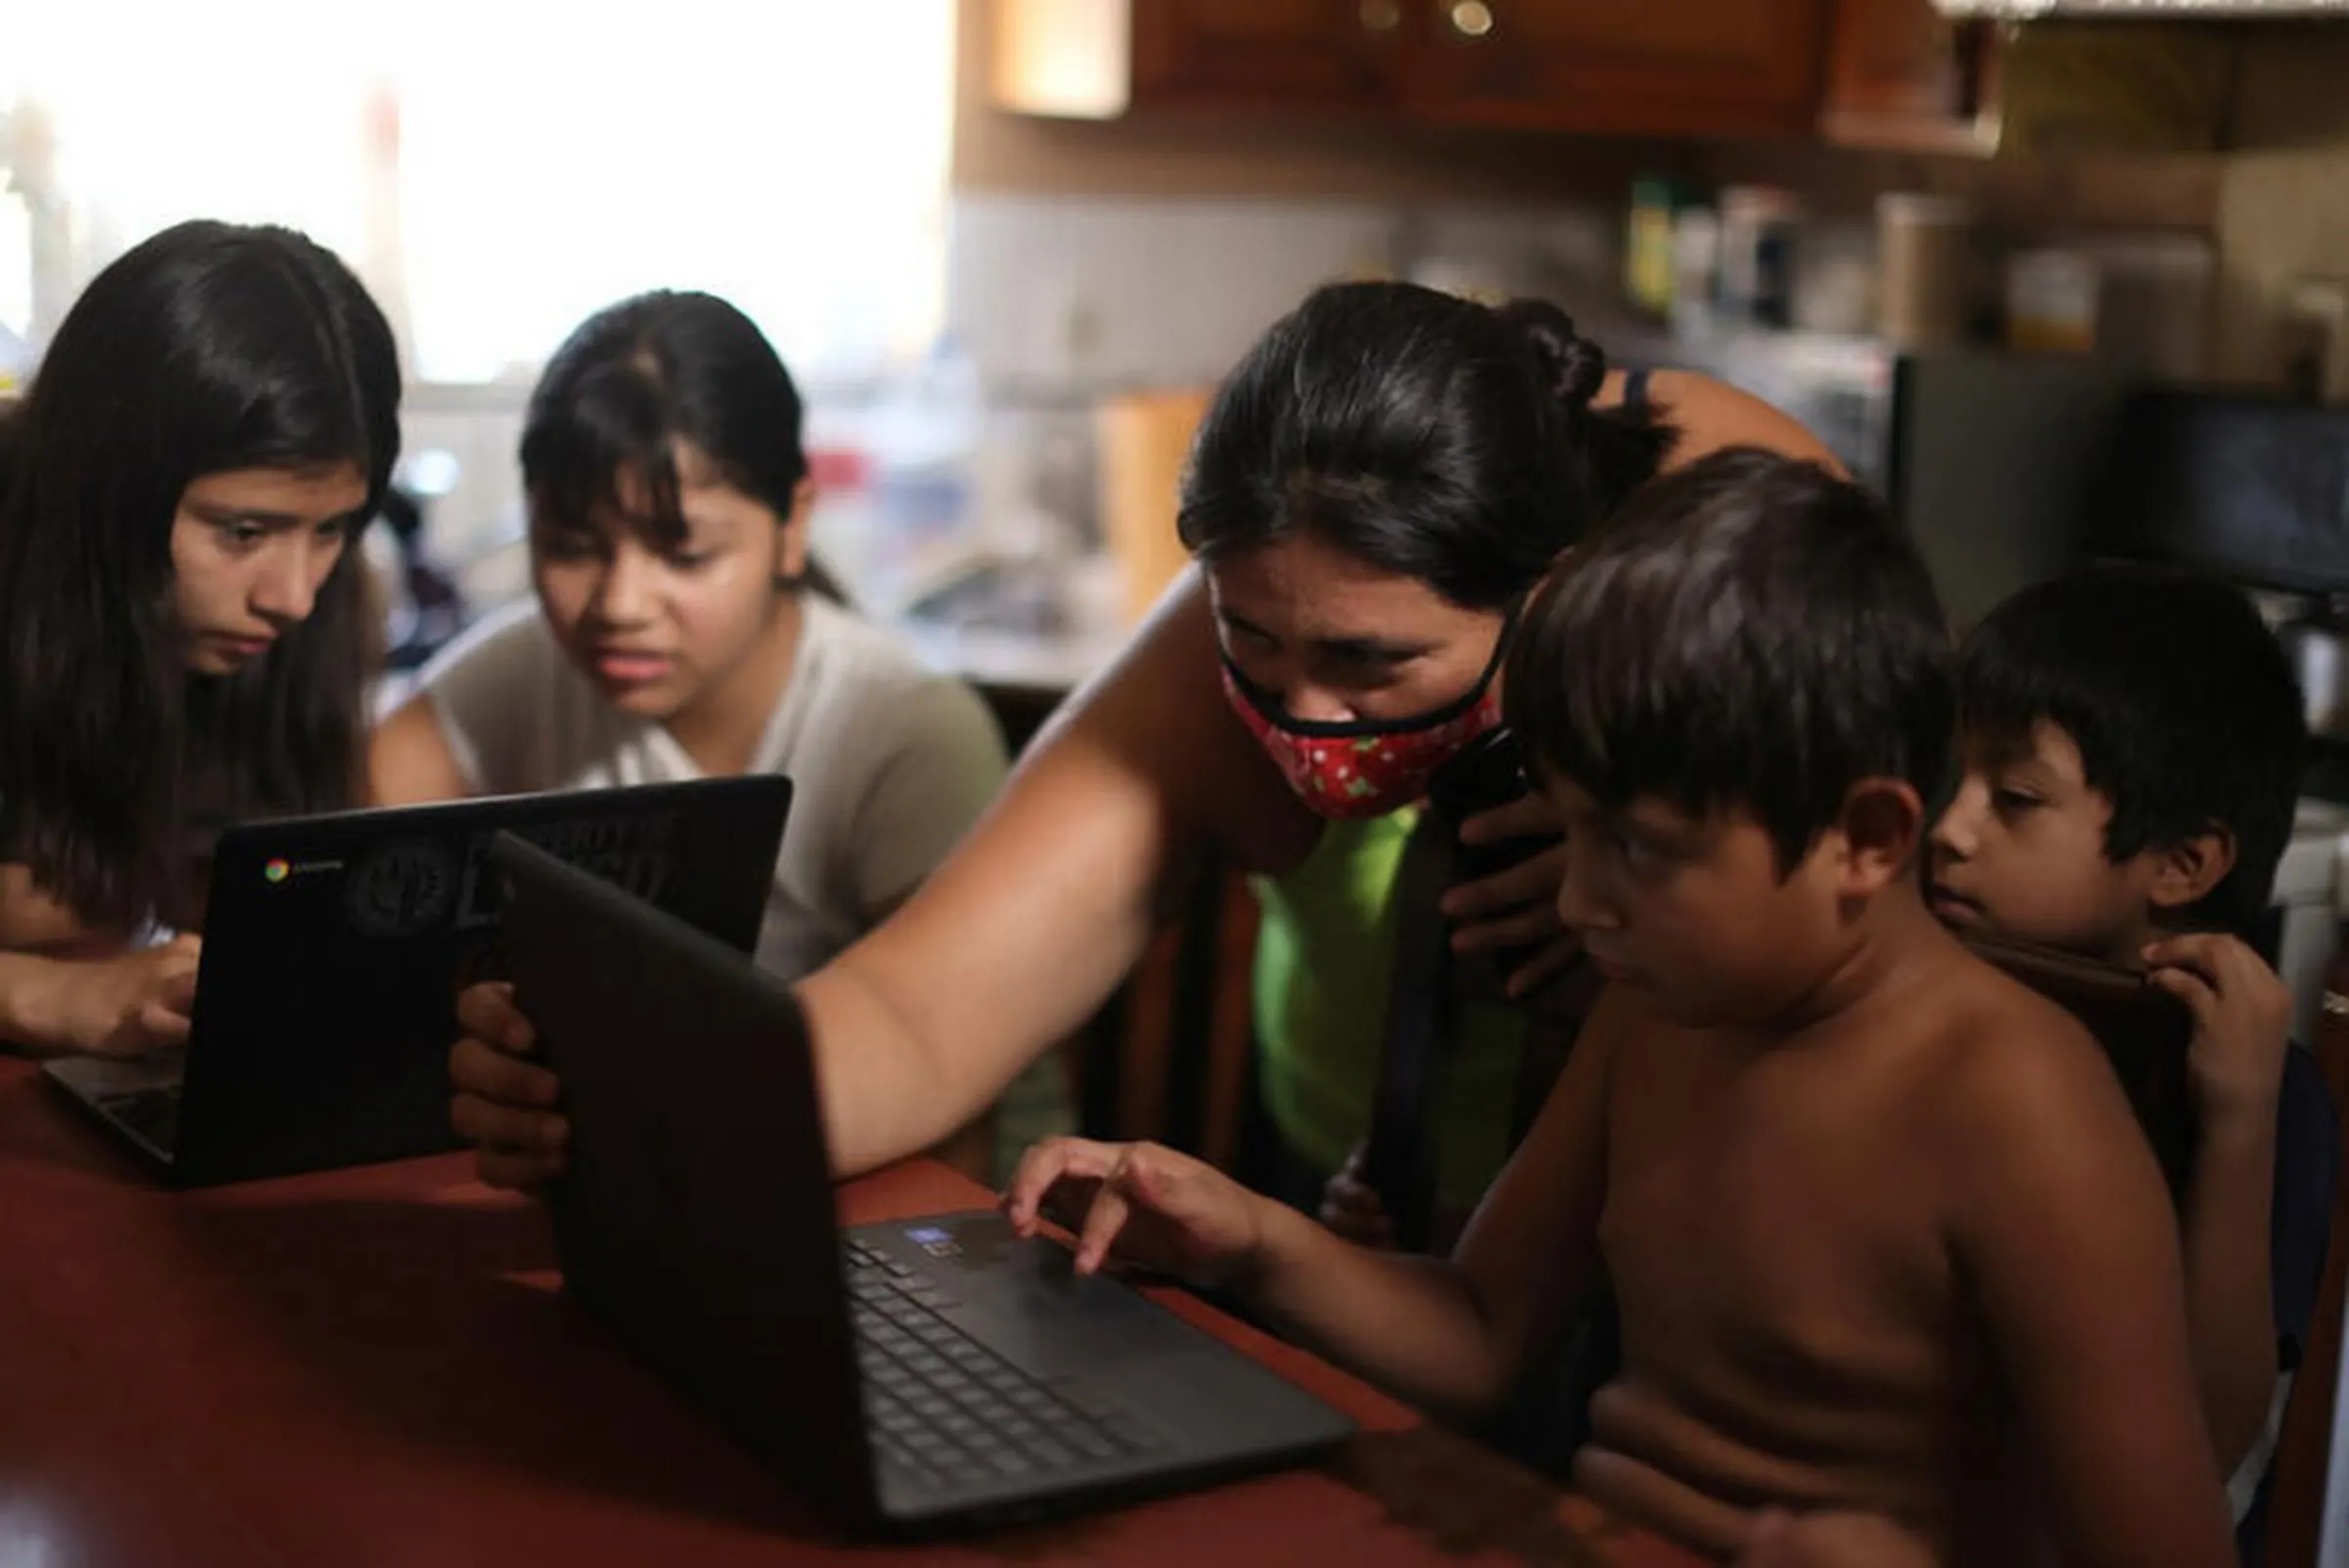 Los Angeles Unified School District (LAUSD) students Keiley Flores, 13, Andrea Ramos, 10, and Alexander Ramos, 8, work on school-issued computers with unreliable internet connectivity, as their mother Anely Solis, 32, and their brother Enrique Ramos, 5, look on, during the global outbreak of the coronavirus disease , at their home in Los Angeles, California, U.S., August 18, 2020